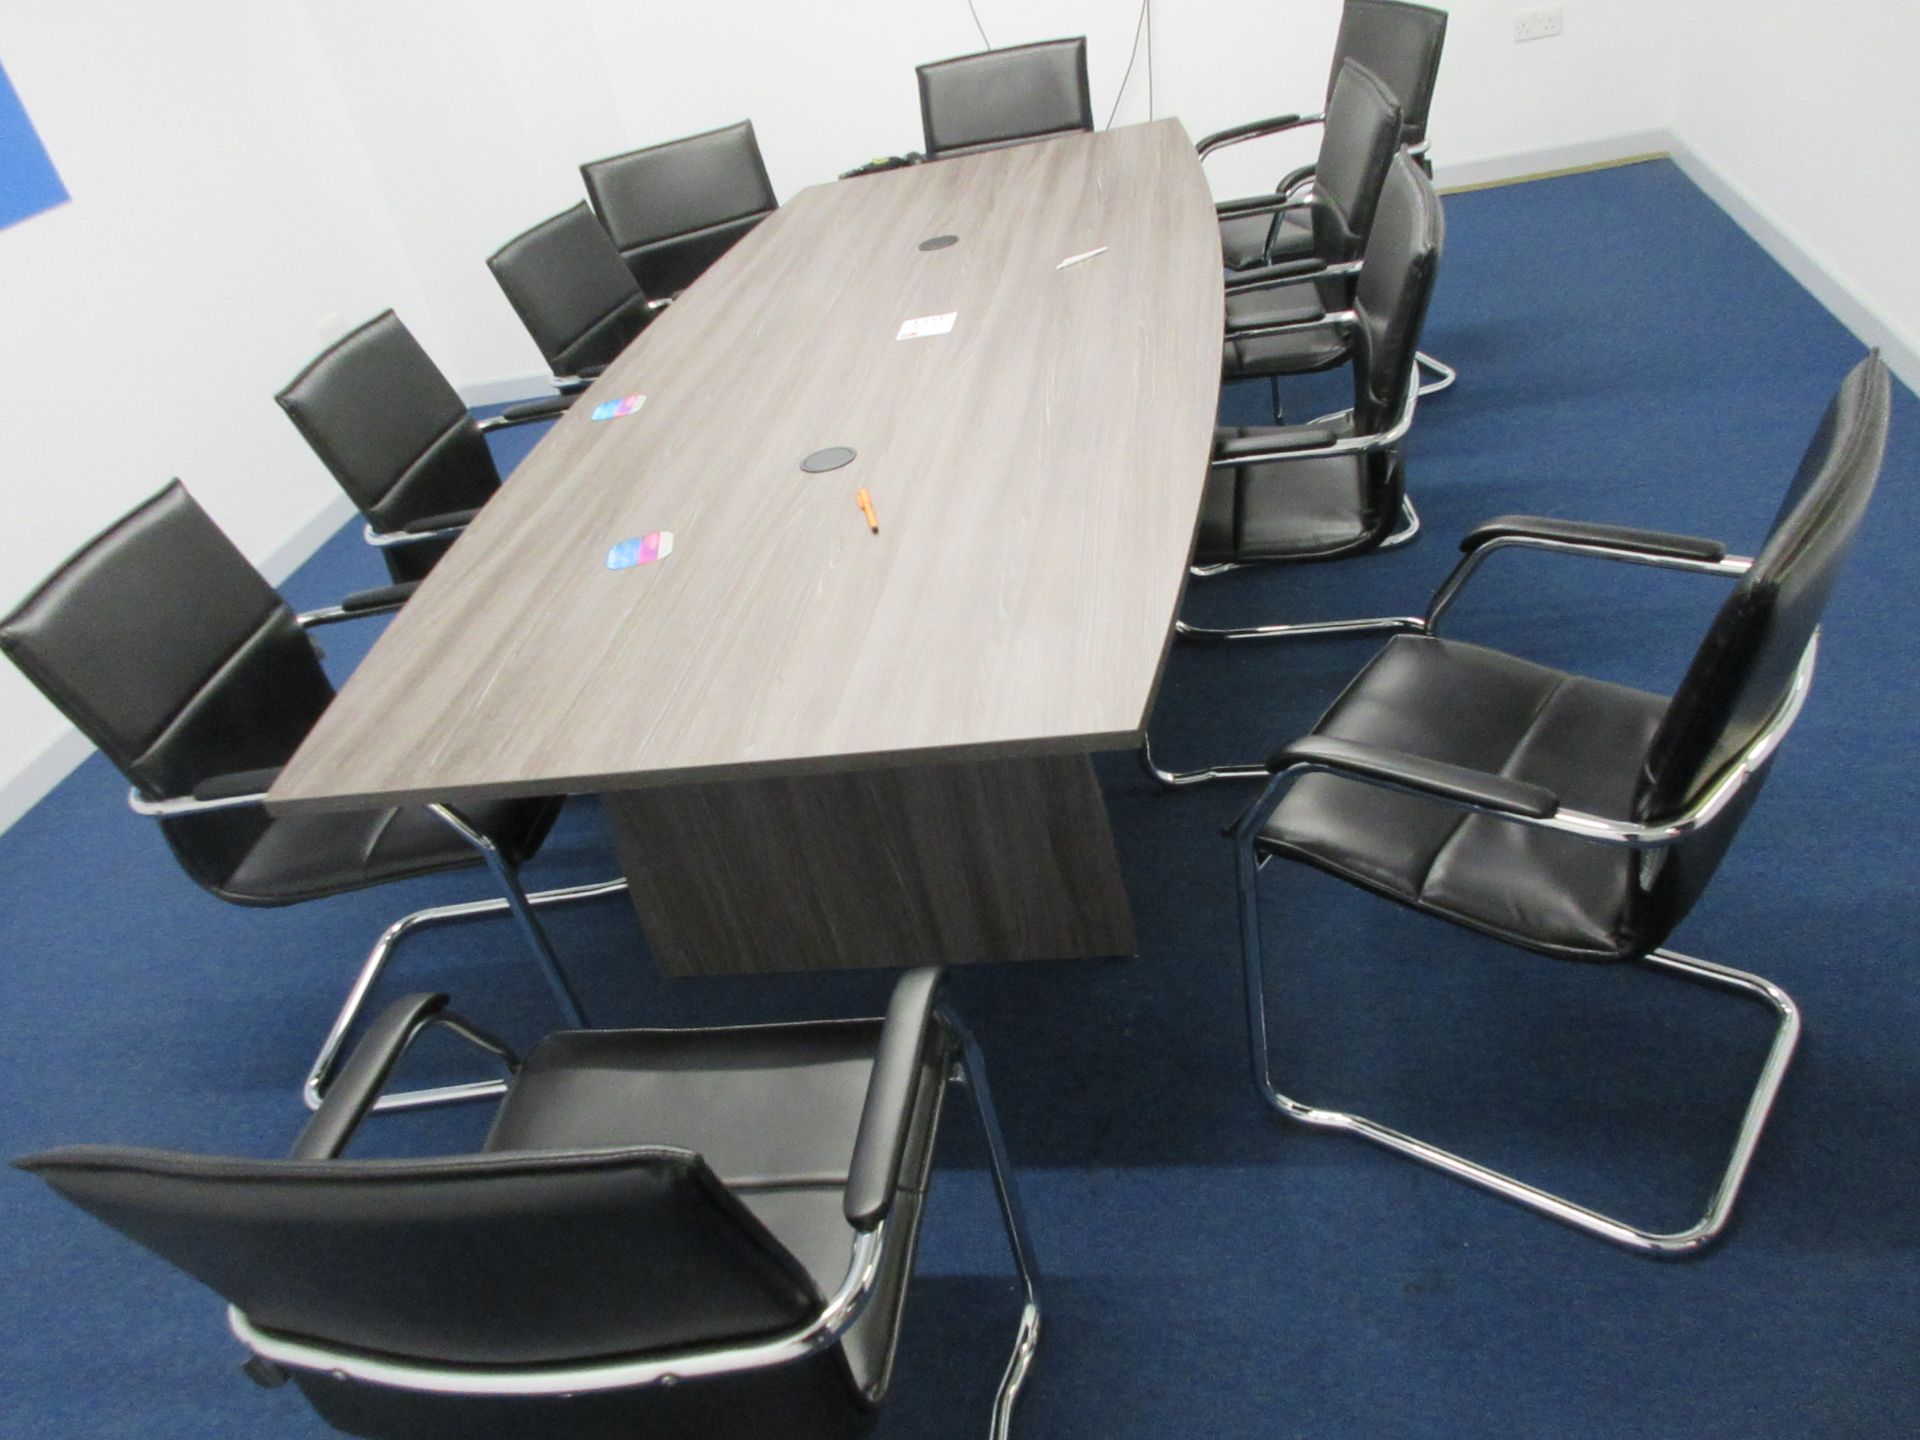 Dark wood effect boardroom table, 10 black leather effect chairs - Image 2 of 5